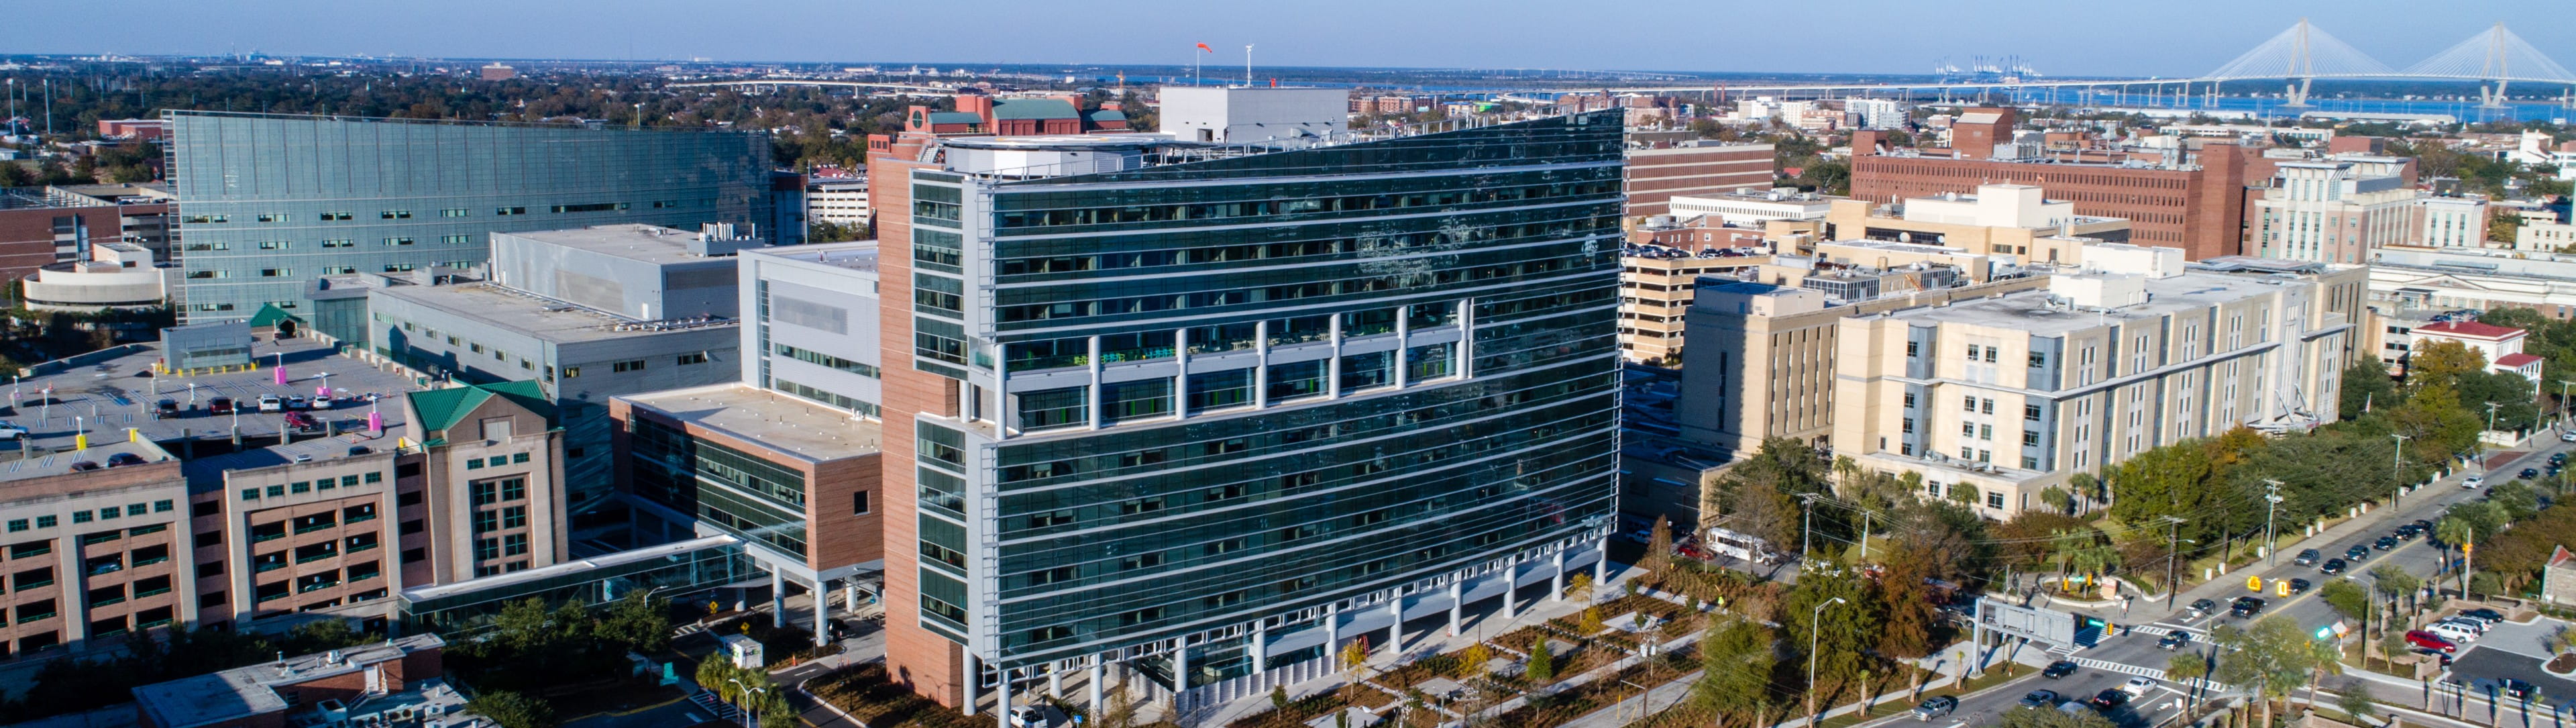 aerial view of the Shawn Jenkins Children's Hospital